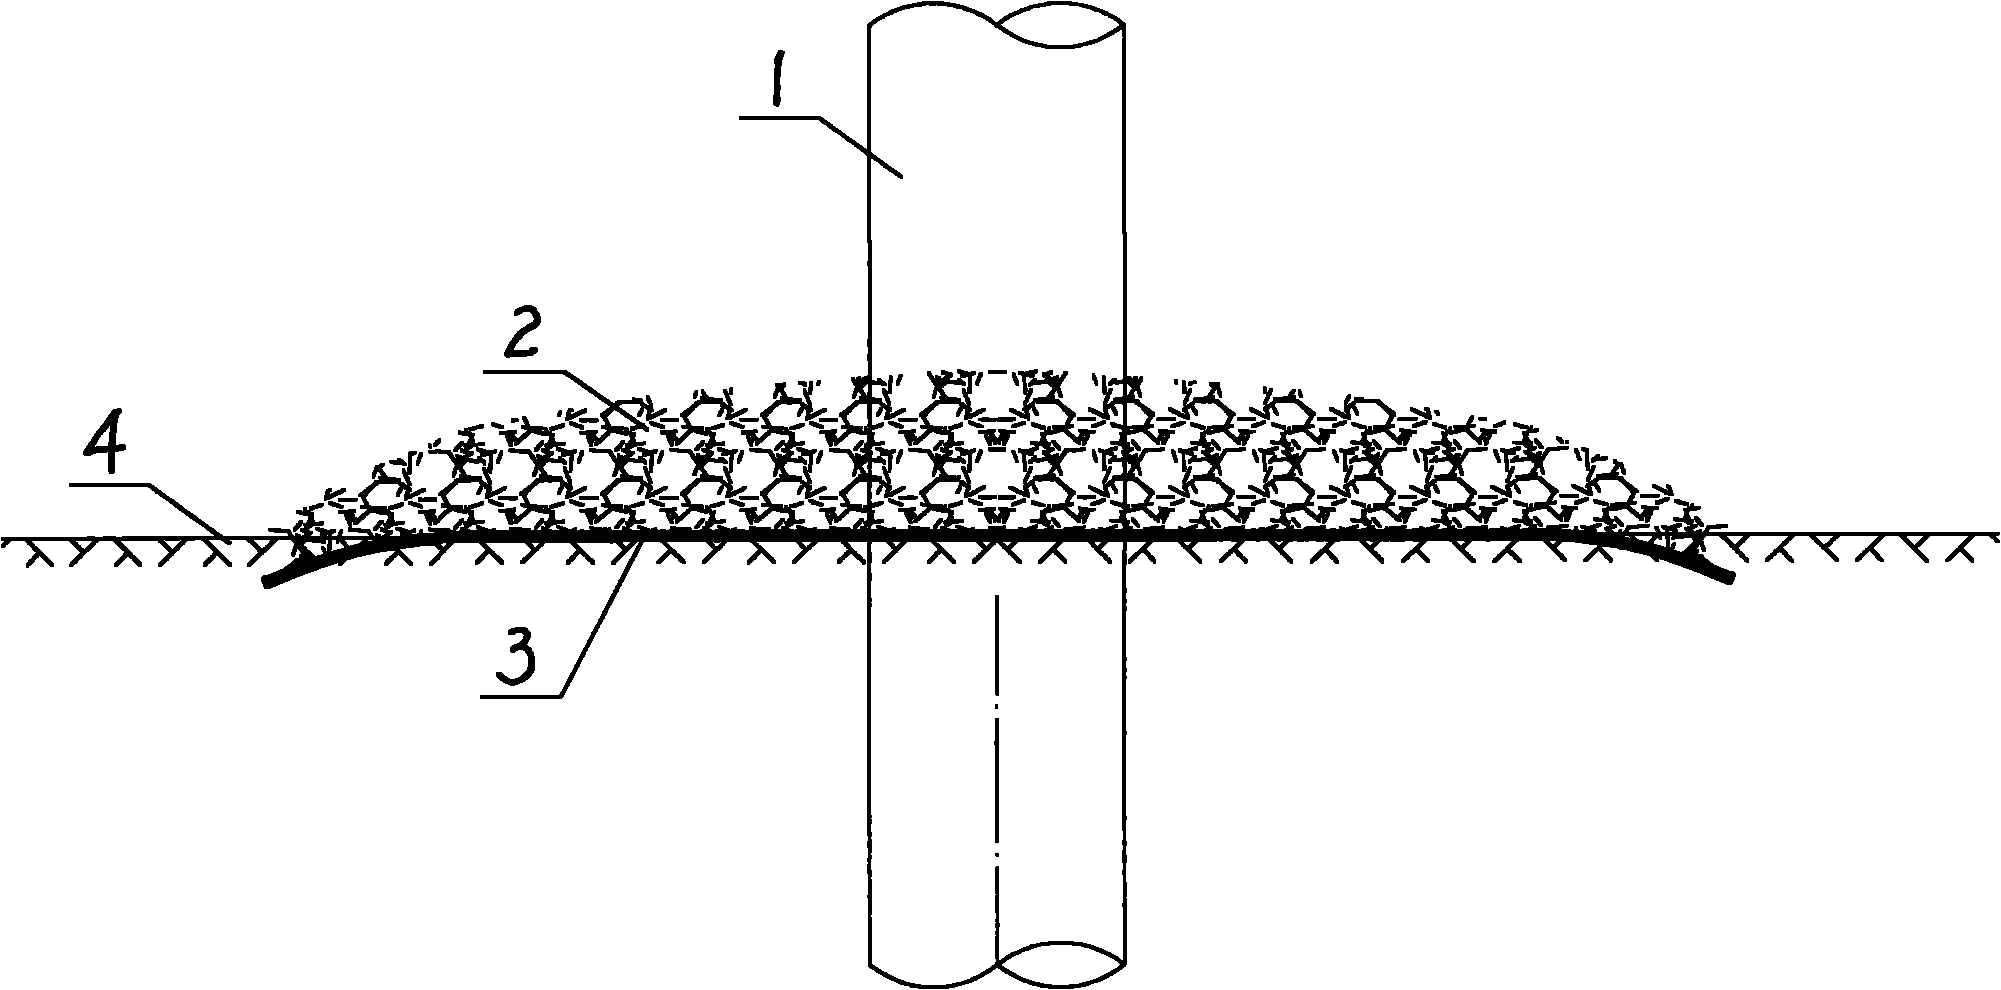 Erosion protection processing method for offshore wind turbine foundation